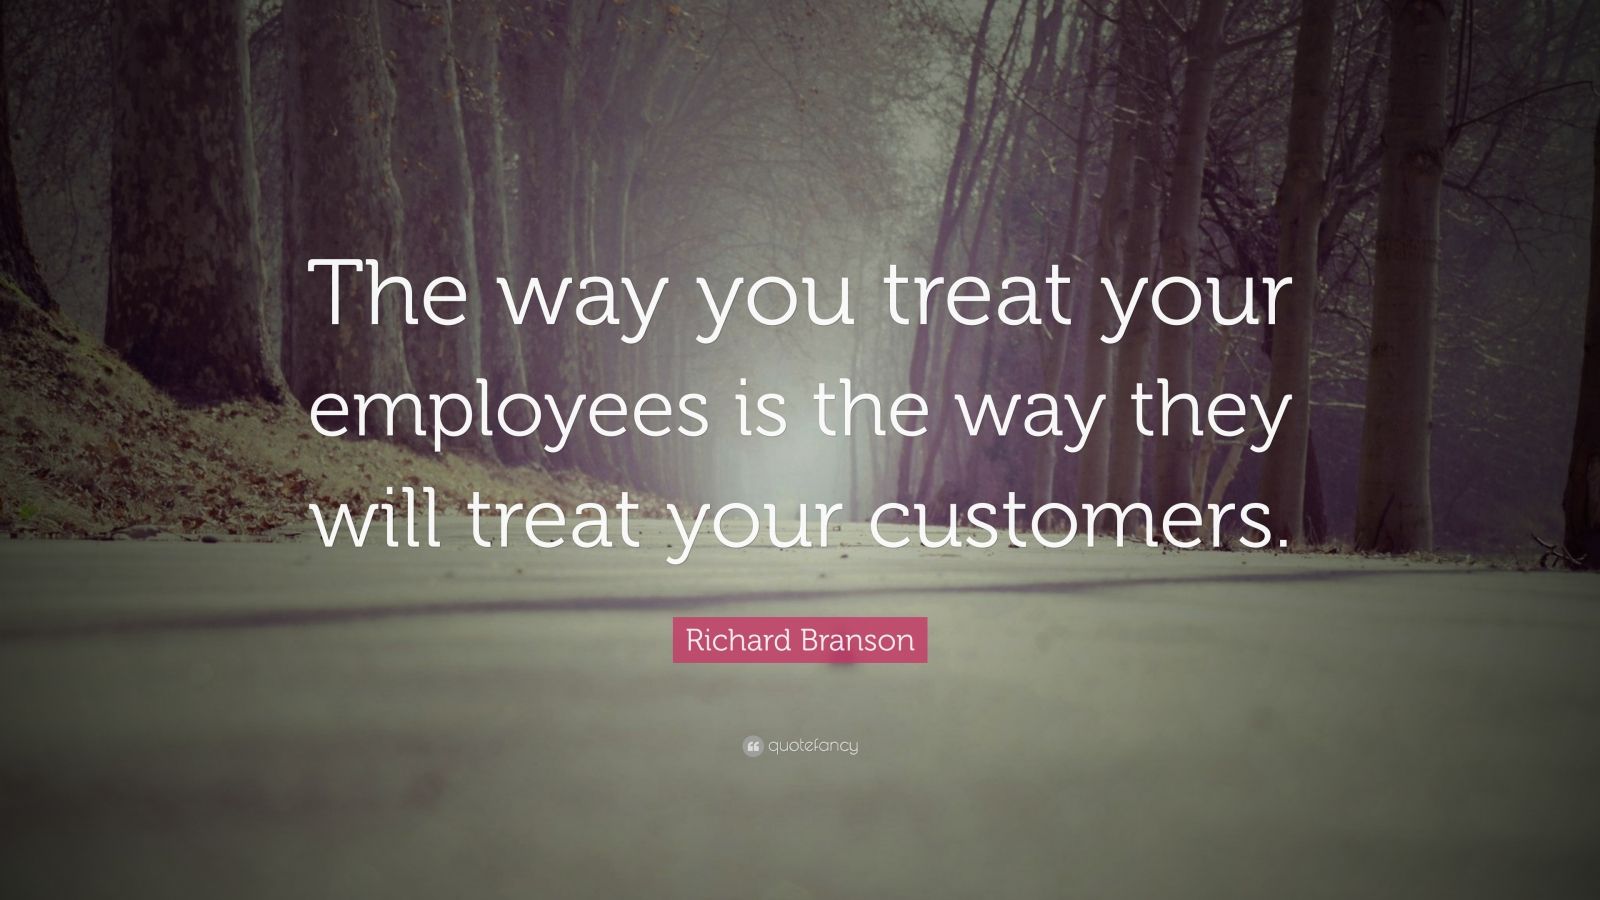 Richard Branson Quote: "The way you treat your employees ...